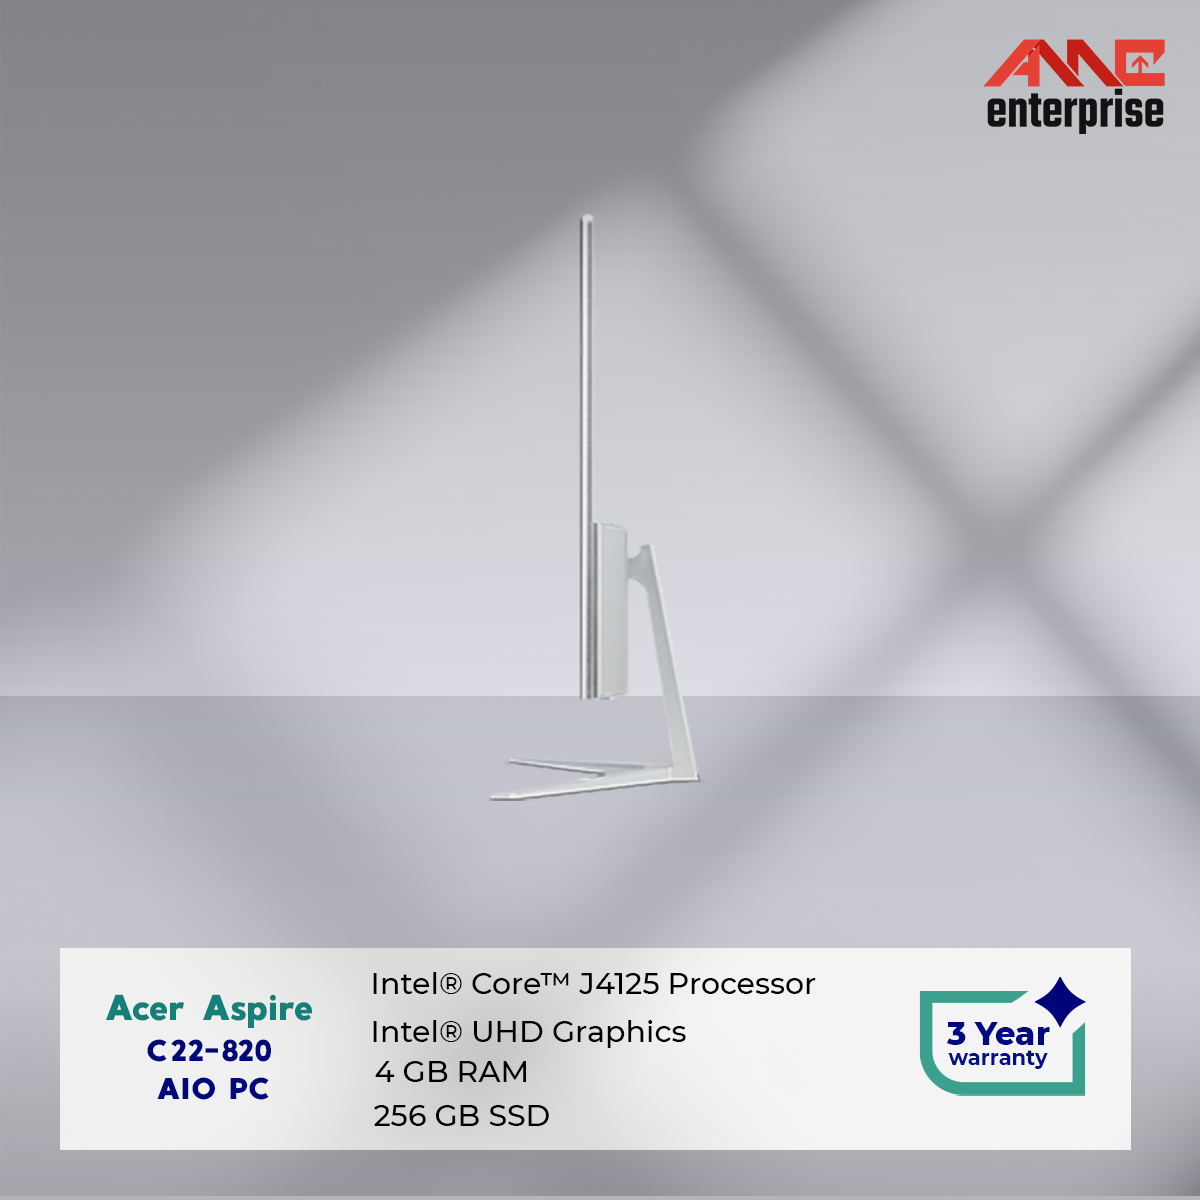 Acer aspire c22-820 AIO PC (6).png